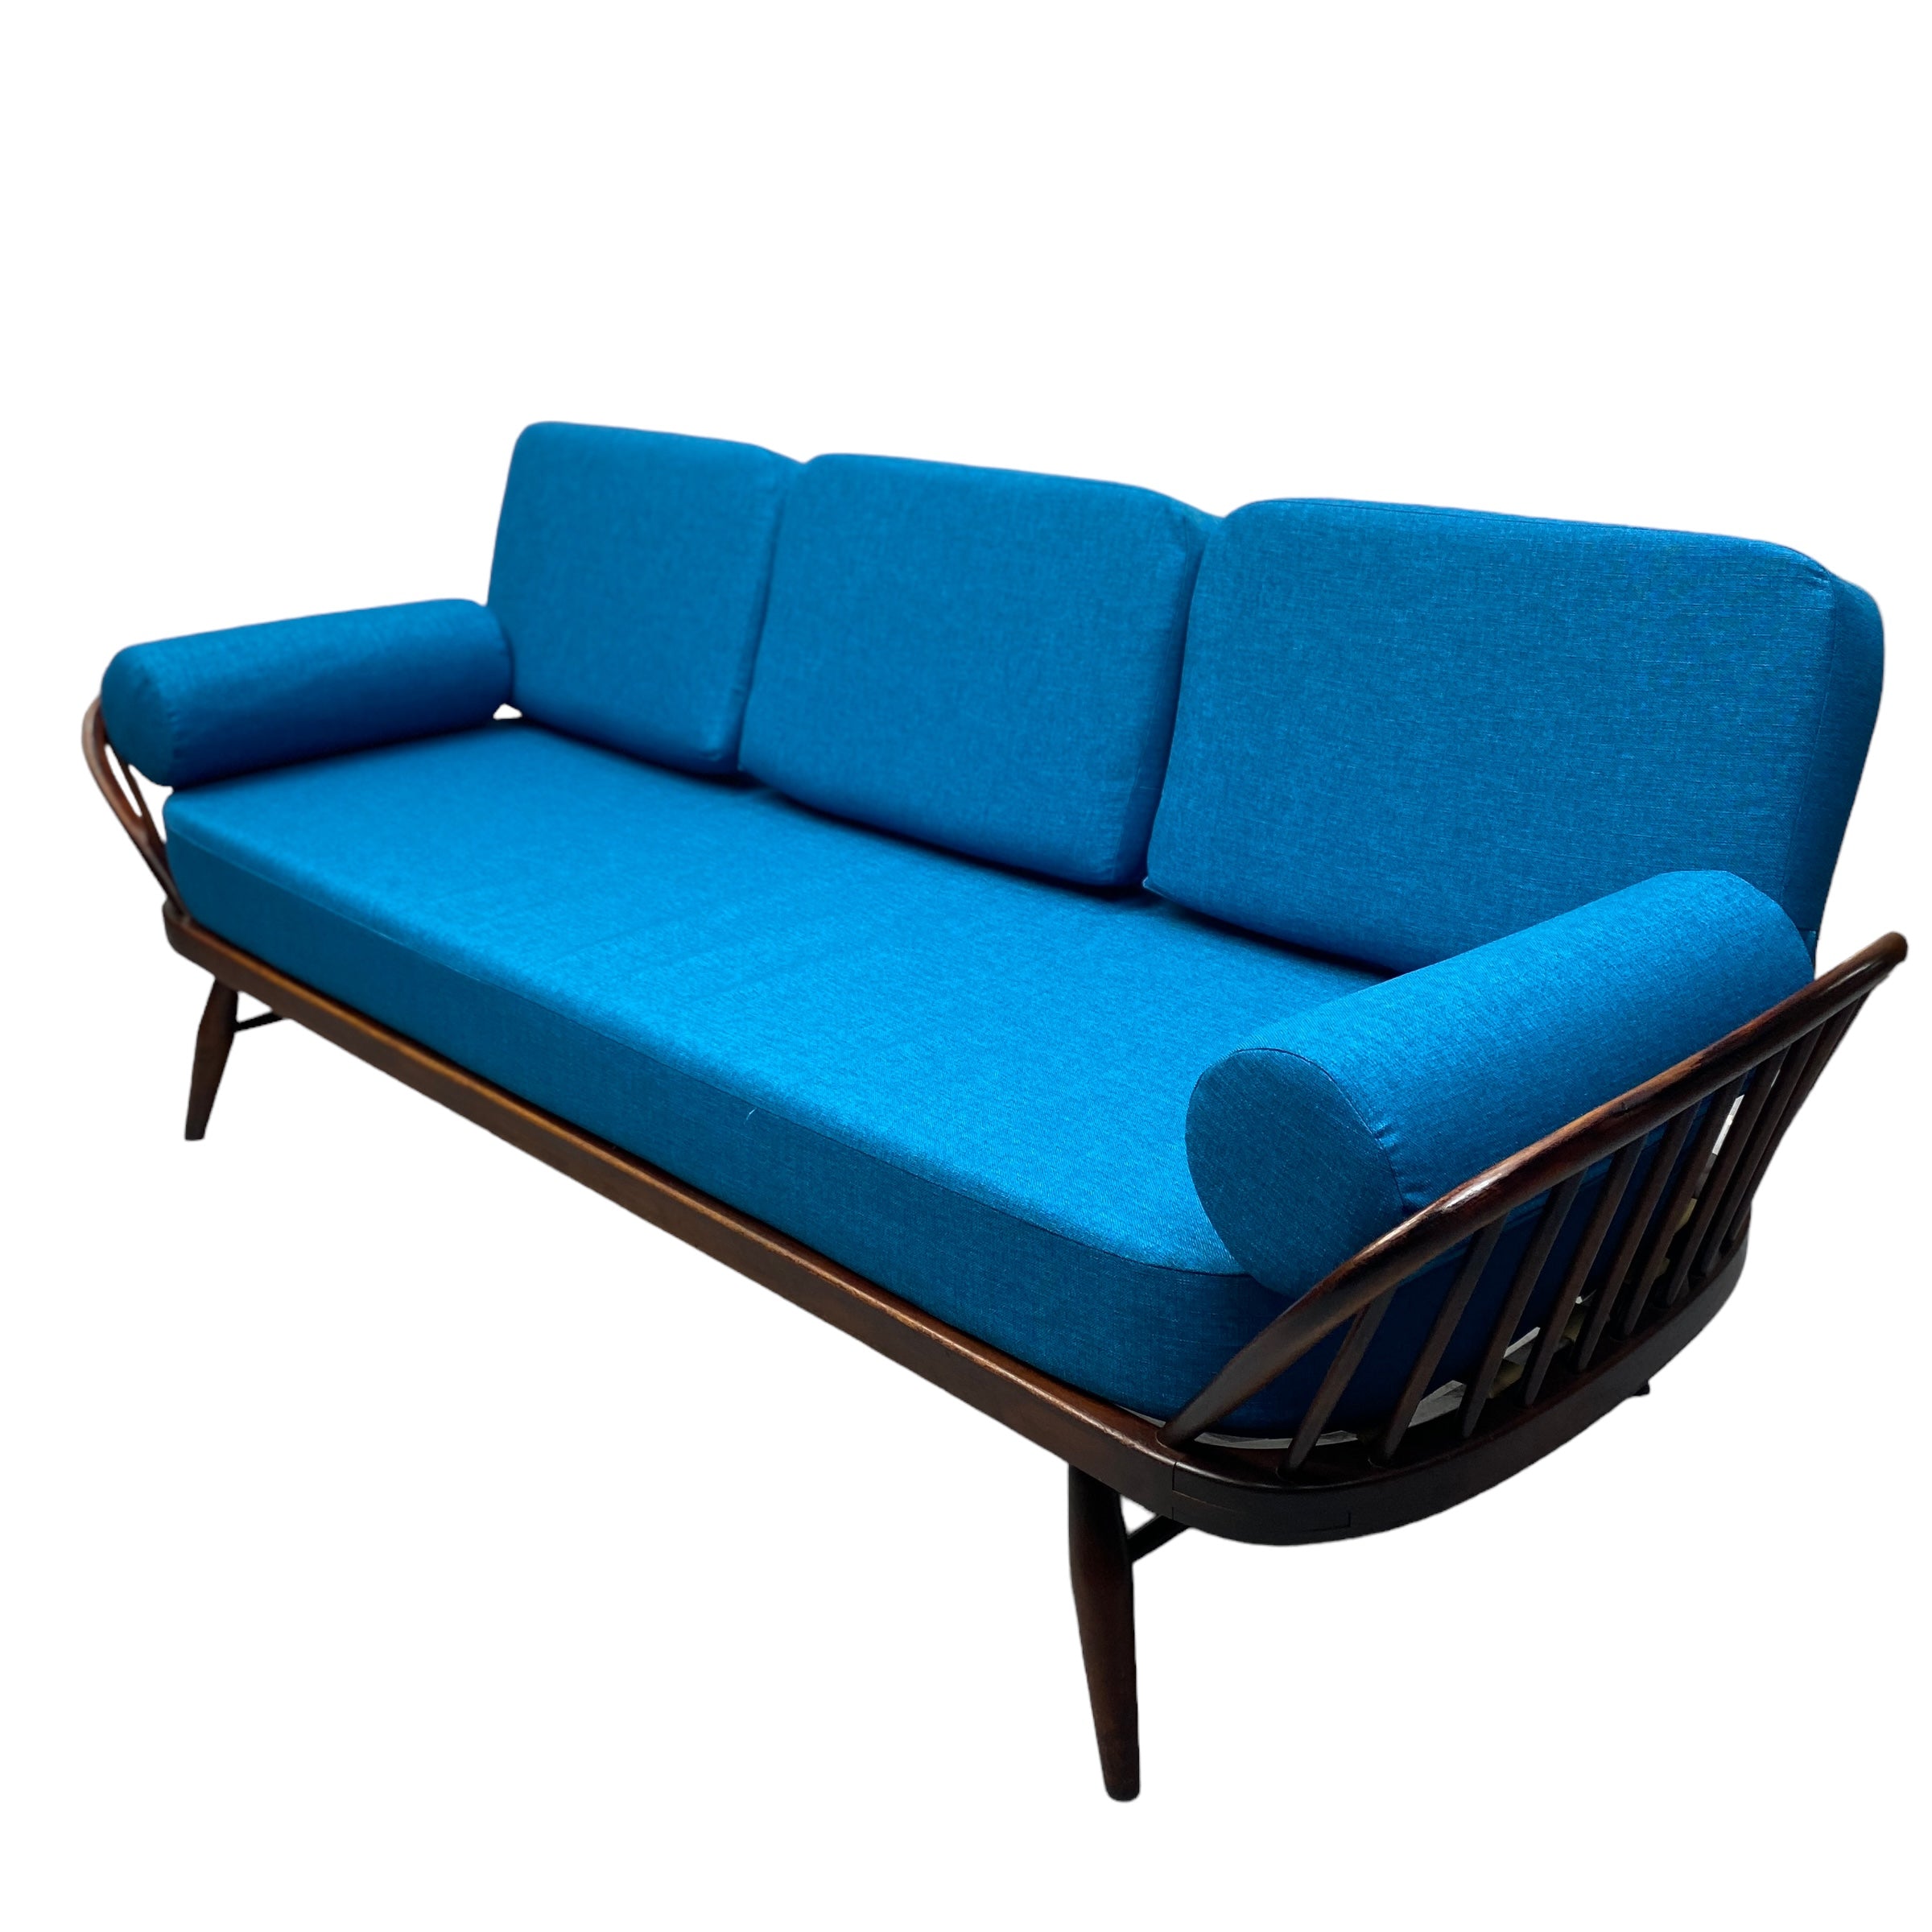 Teal Ercol Daybed 355